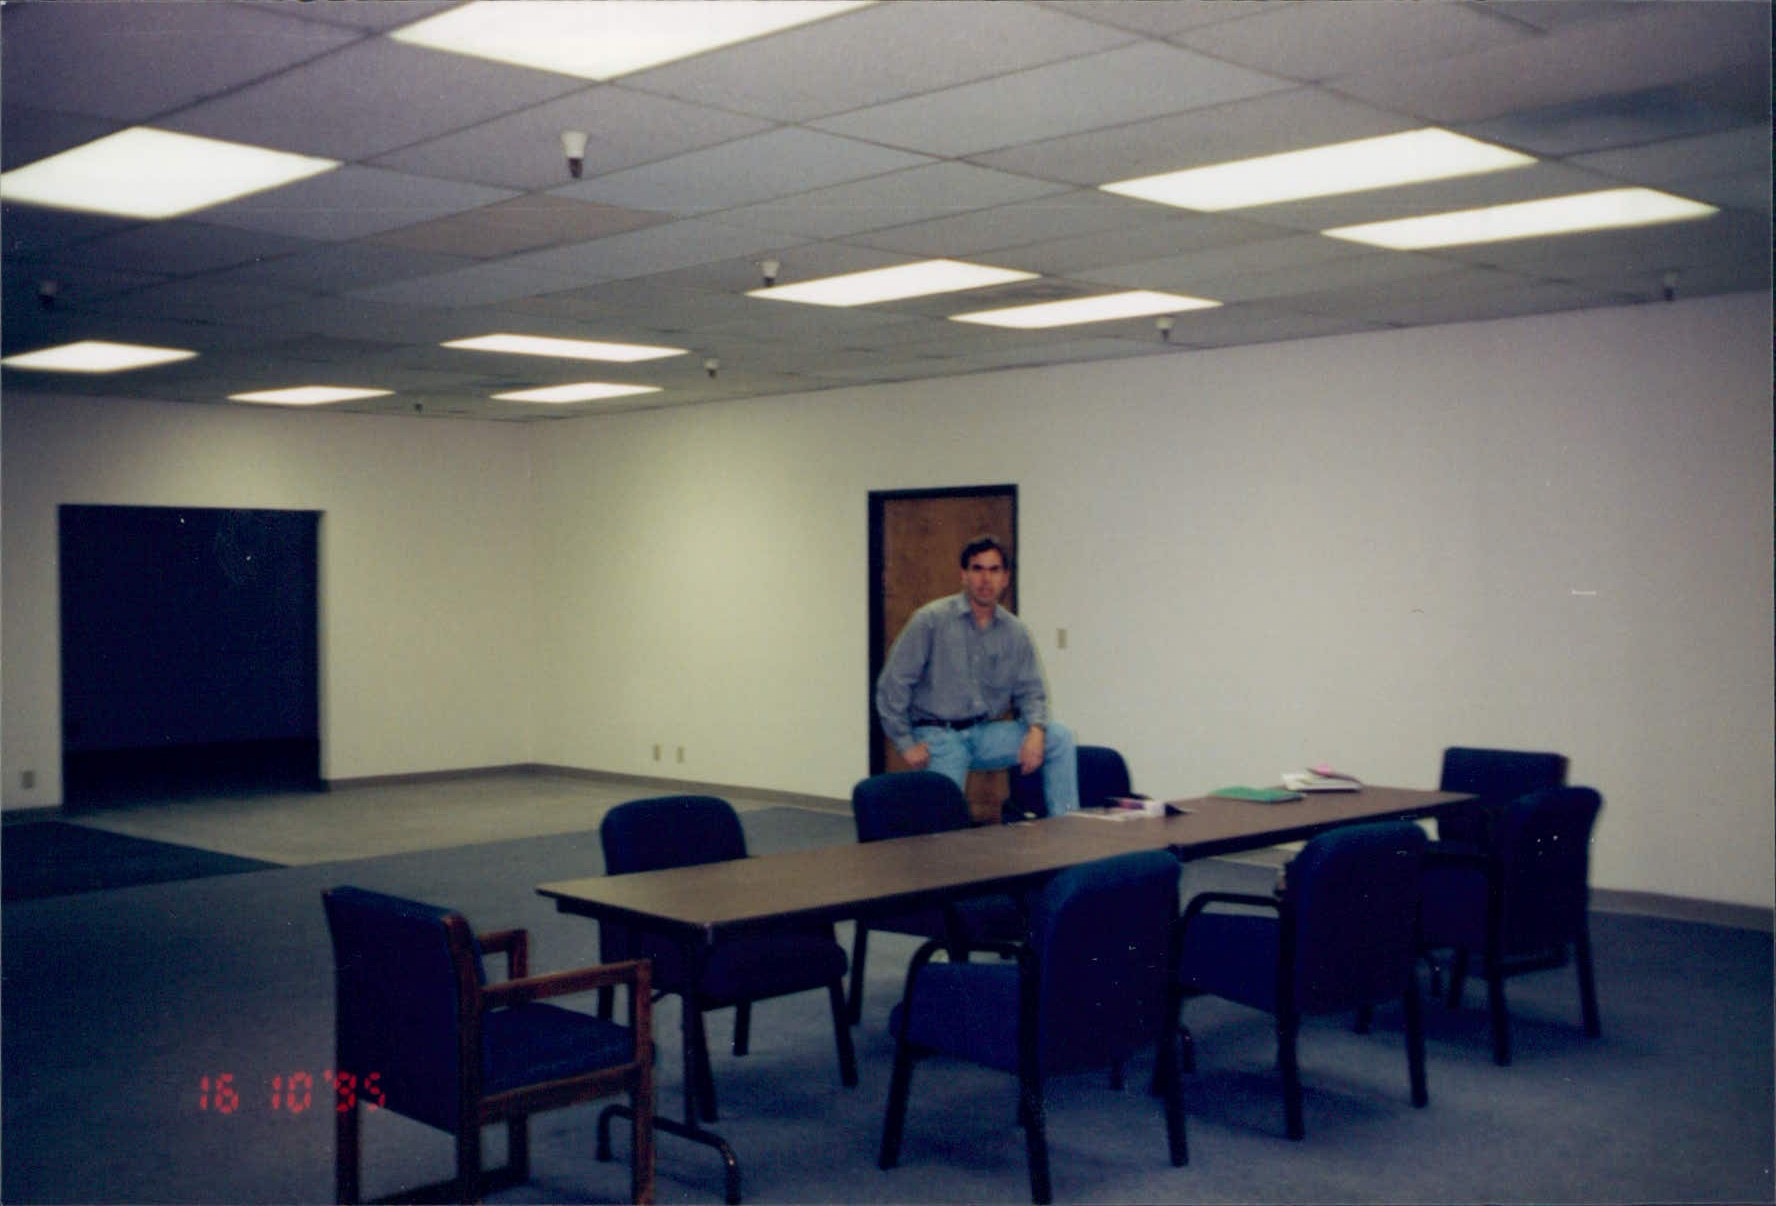 Getting ready for big the Cisco meeting - Oct 1995<br />John Mayes at NTI HQ - 2464 Embarcadero Road<br />Photo probably by Richard Clark